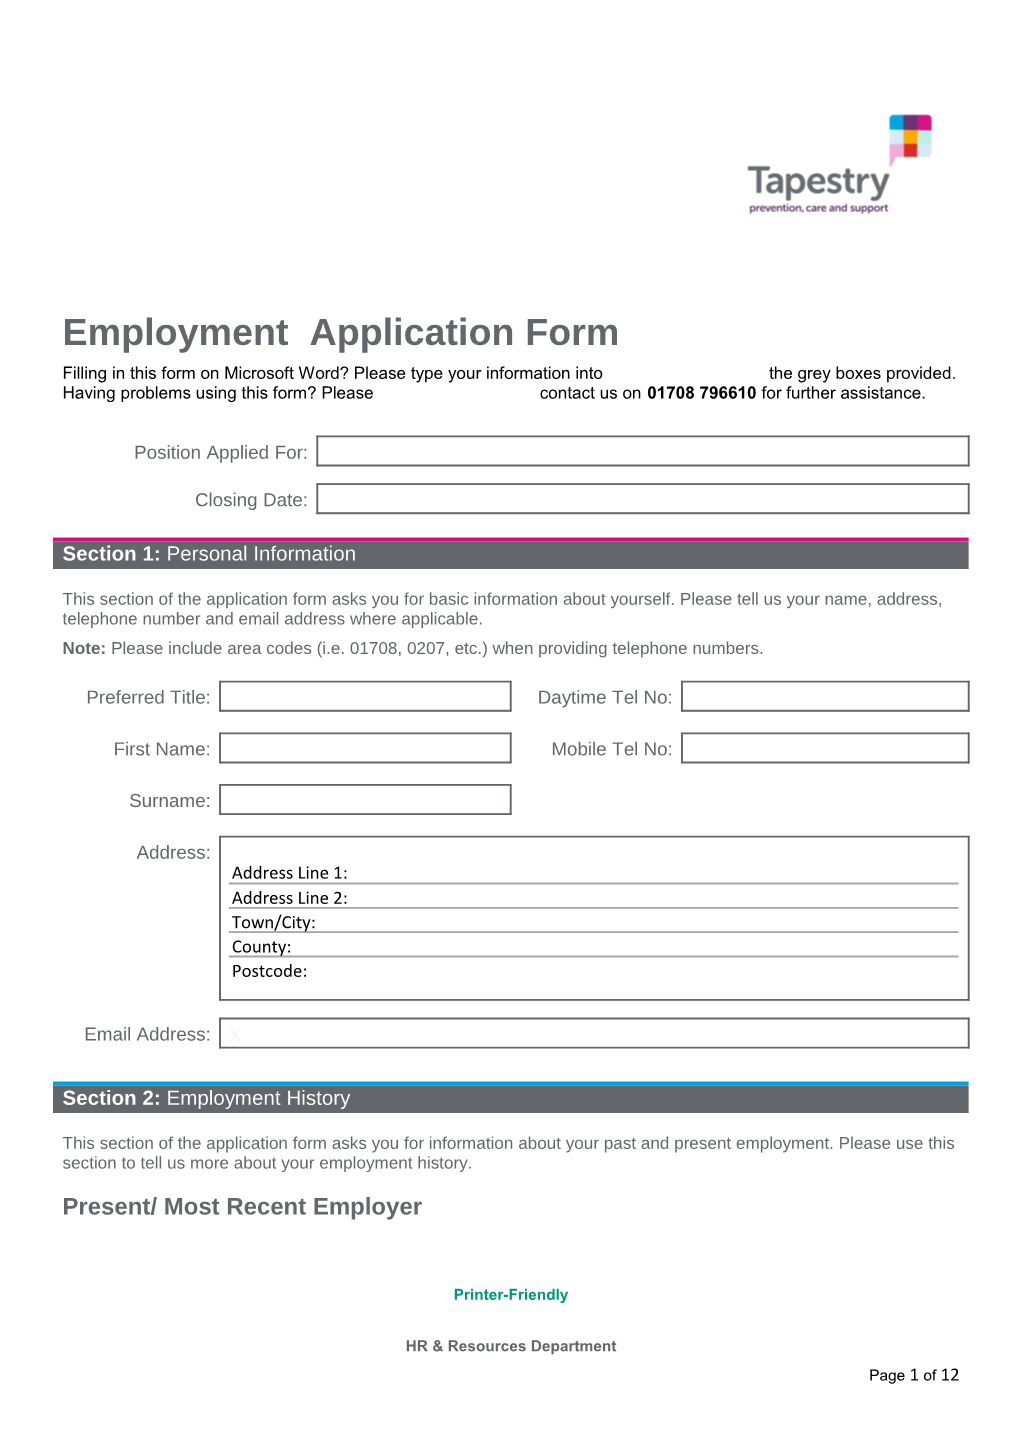 Employment Application Form NEW